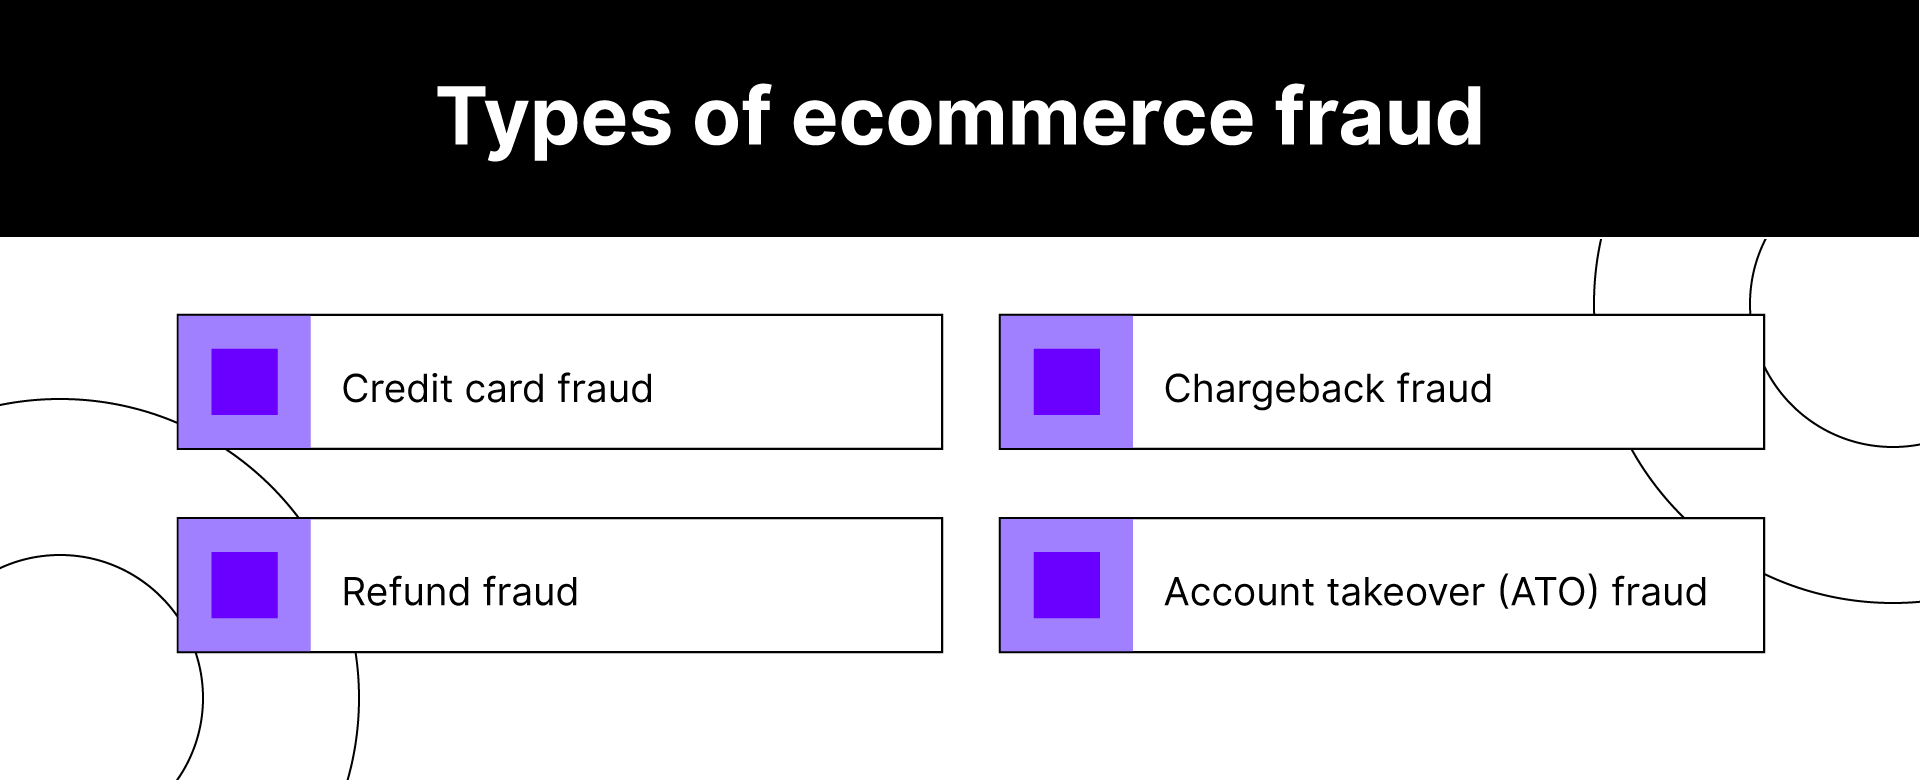 Types of ecommerce fraud.